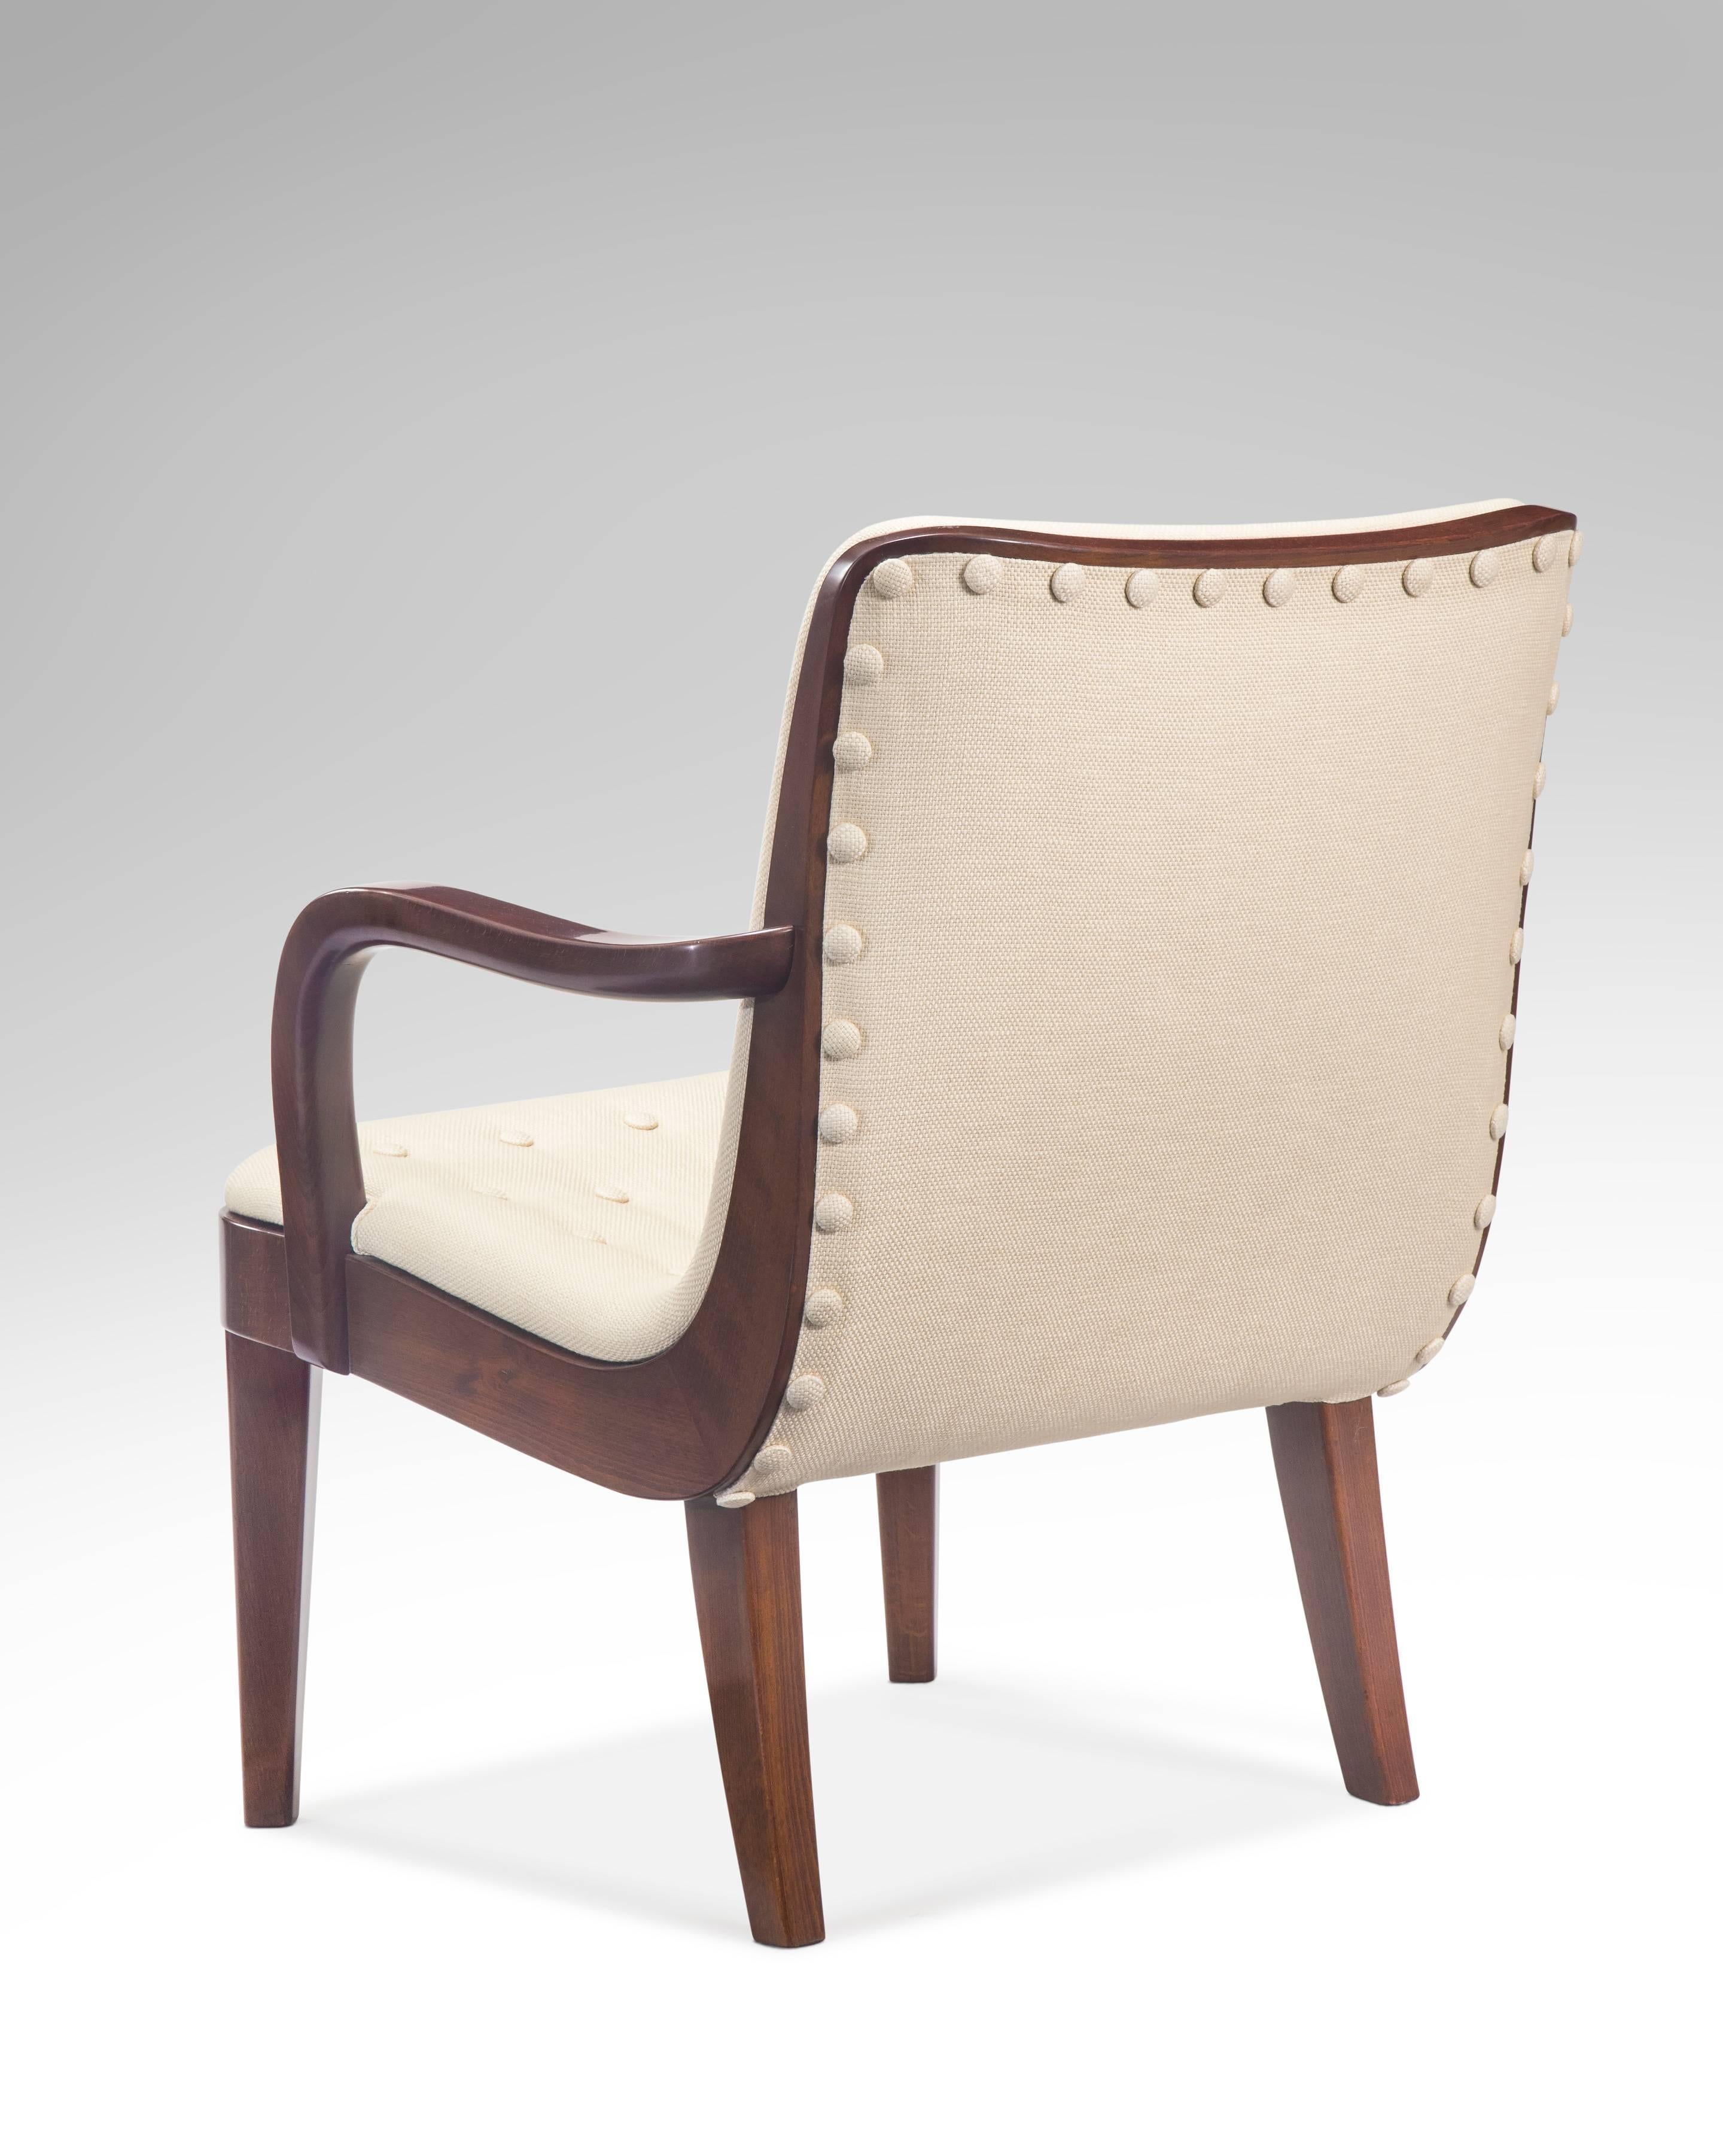 20th Century Axel Larsson for Bodafors, Attributed, Swedish Upholstered Beech Armchair